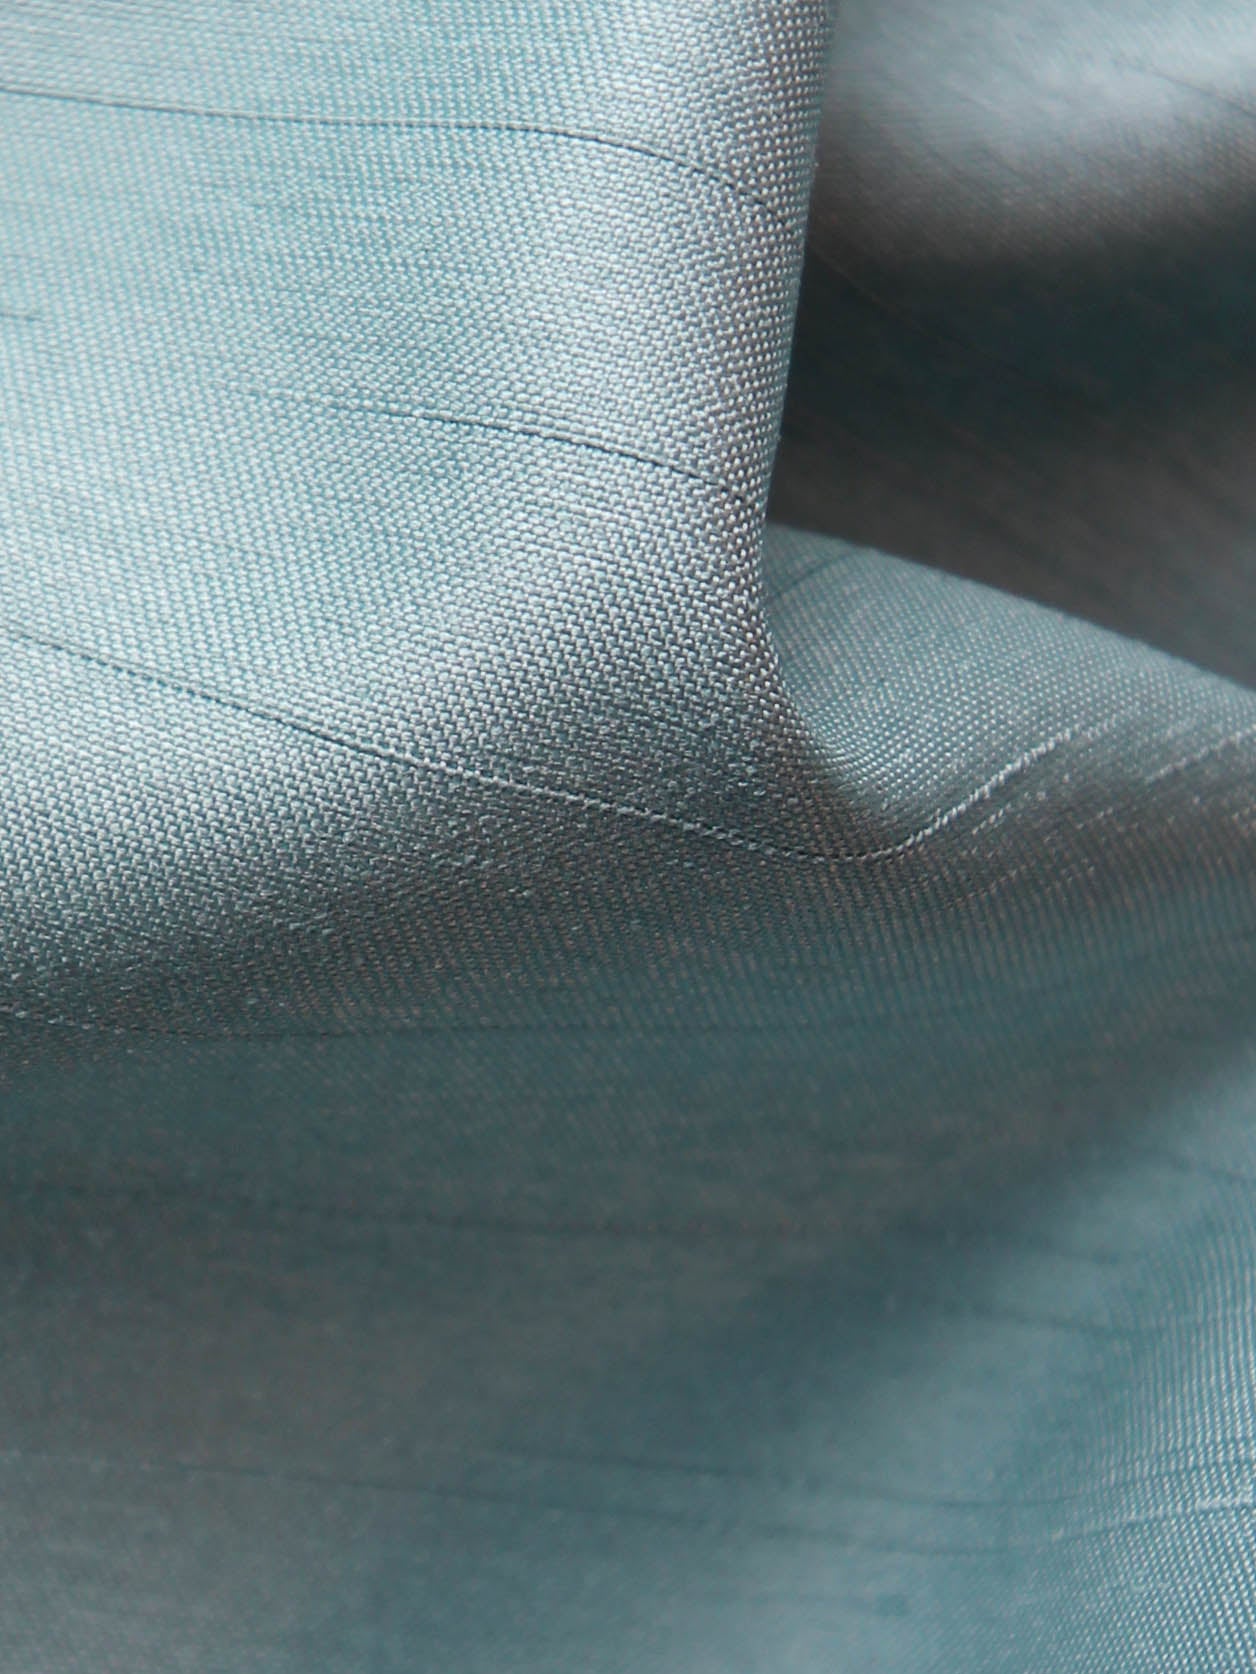 Polyester Satin Backed Dupion (115cm/45) - Clarity (Light Colours)